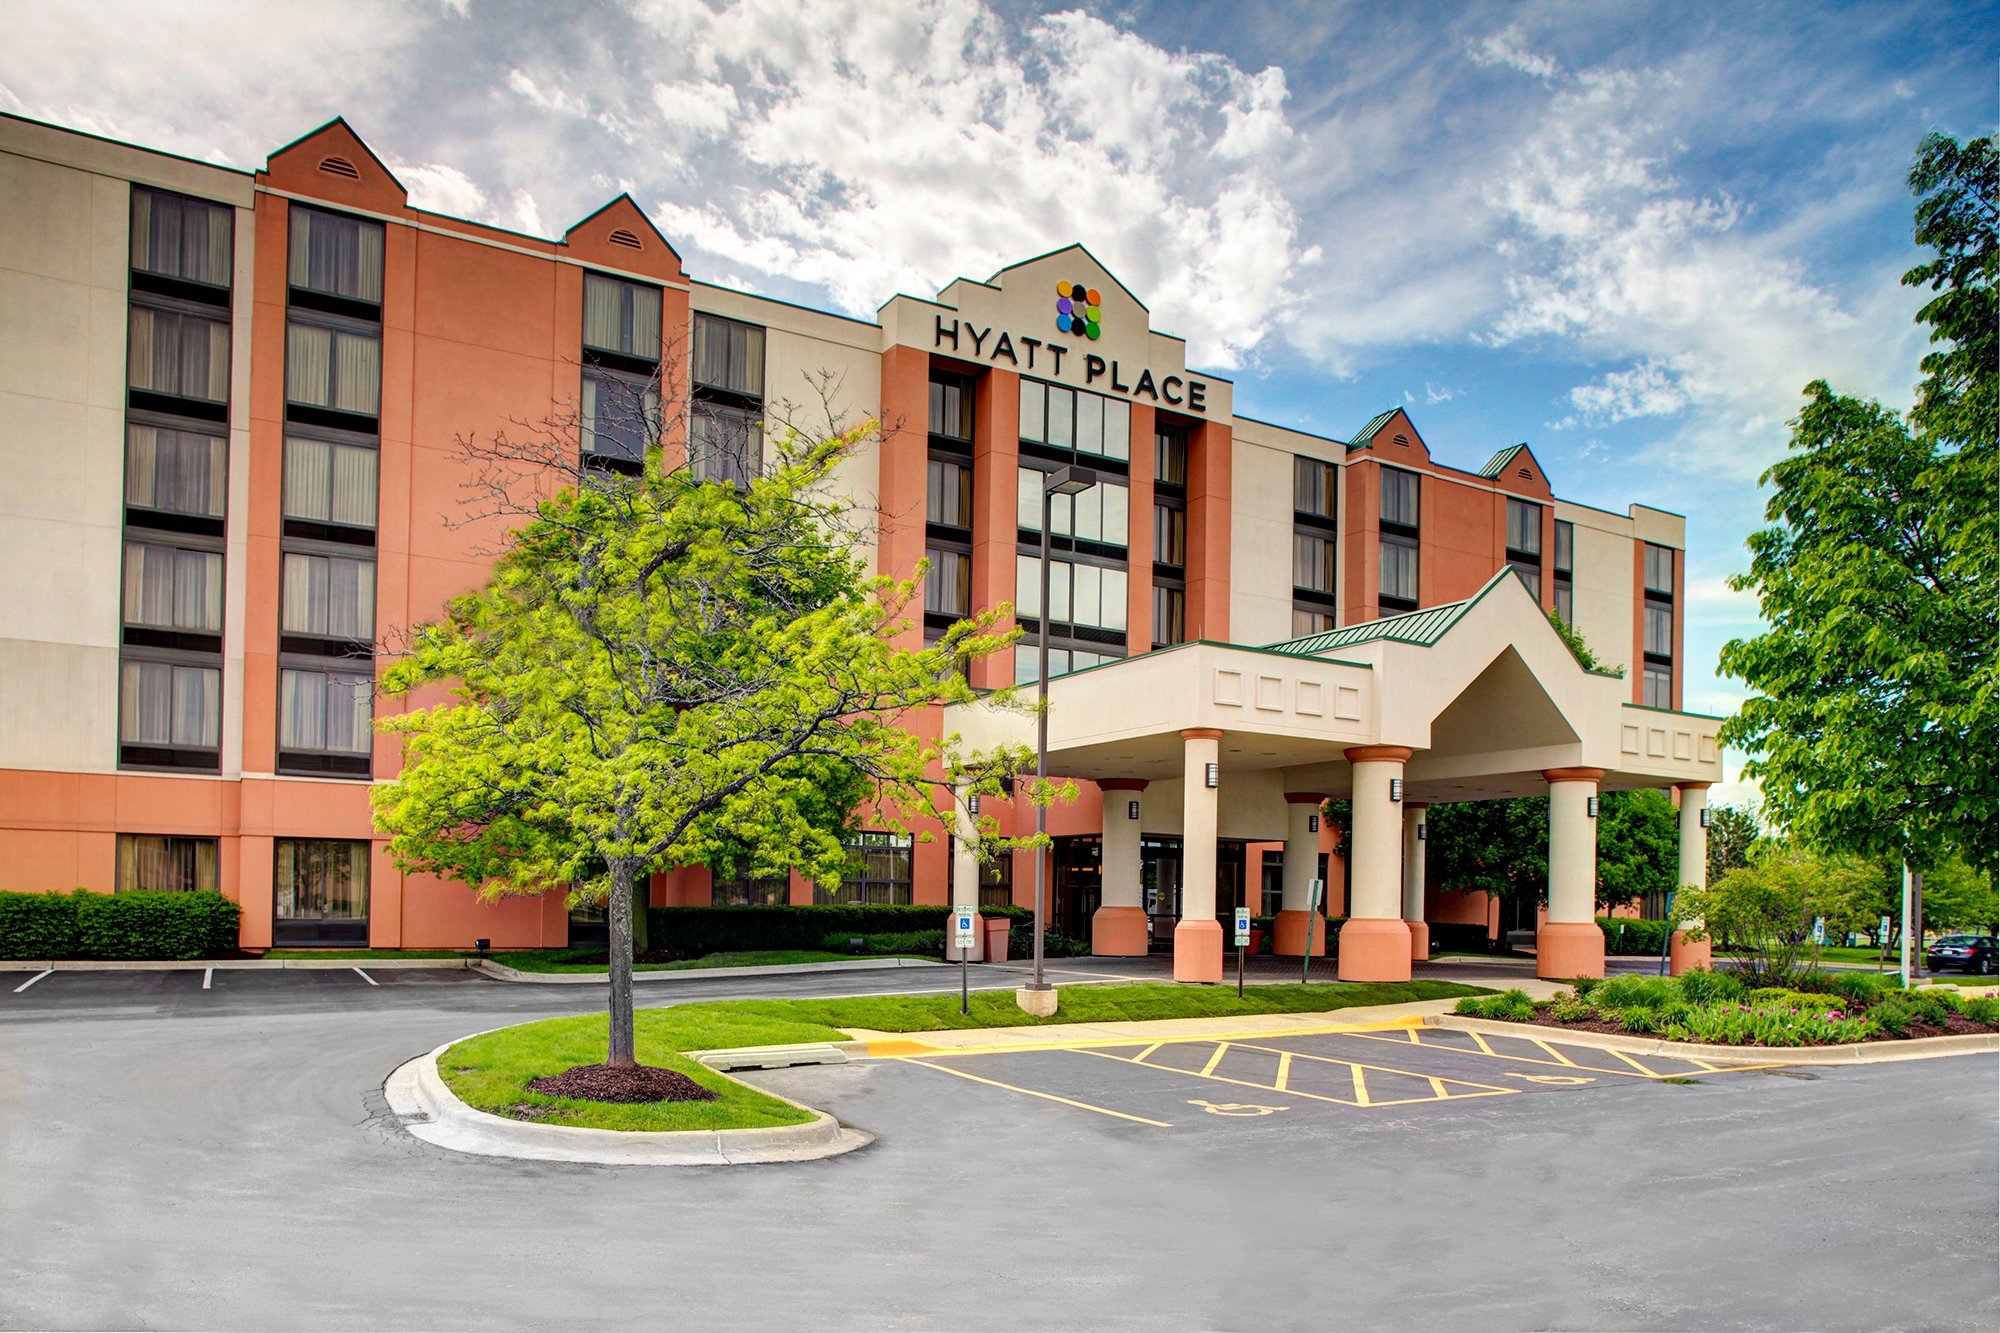 Photo of Hyatt Place Chicago/Itasca, Itasca, IL